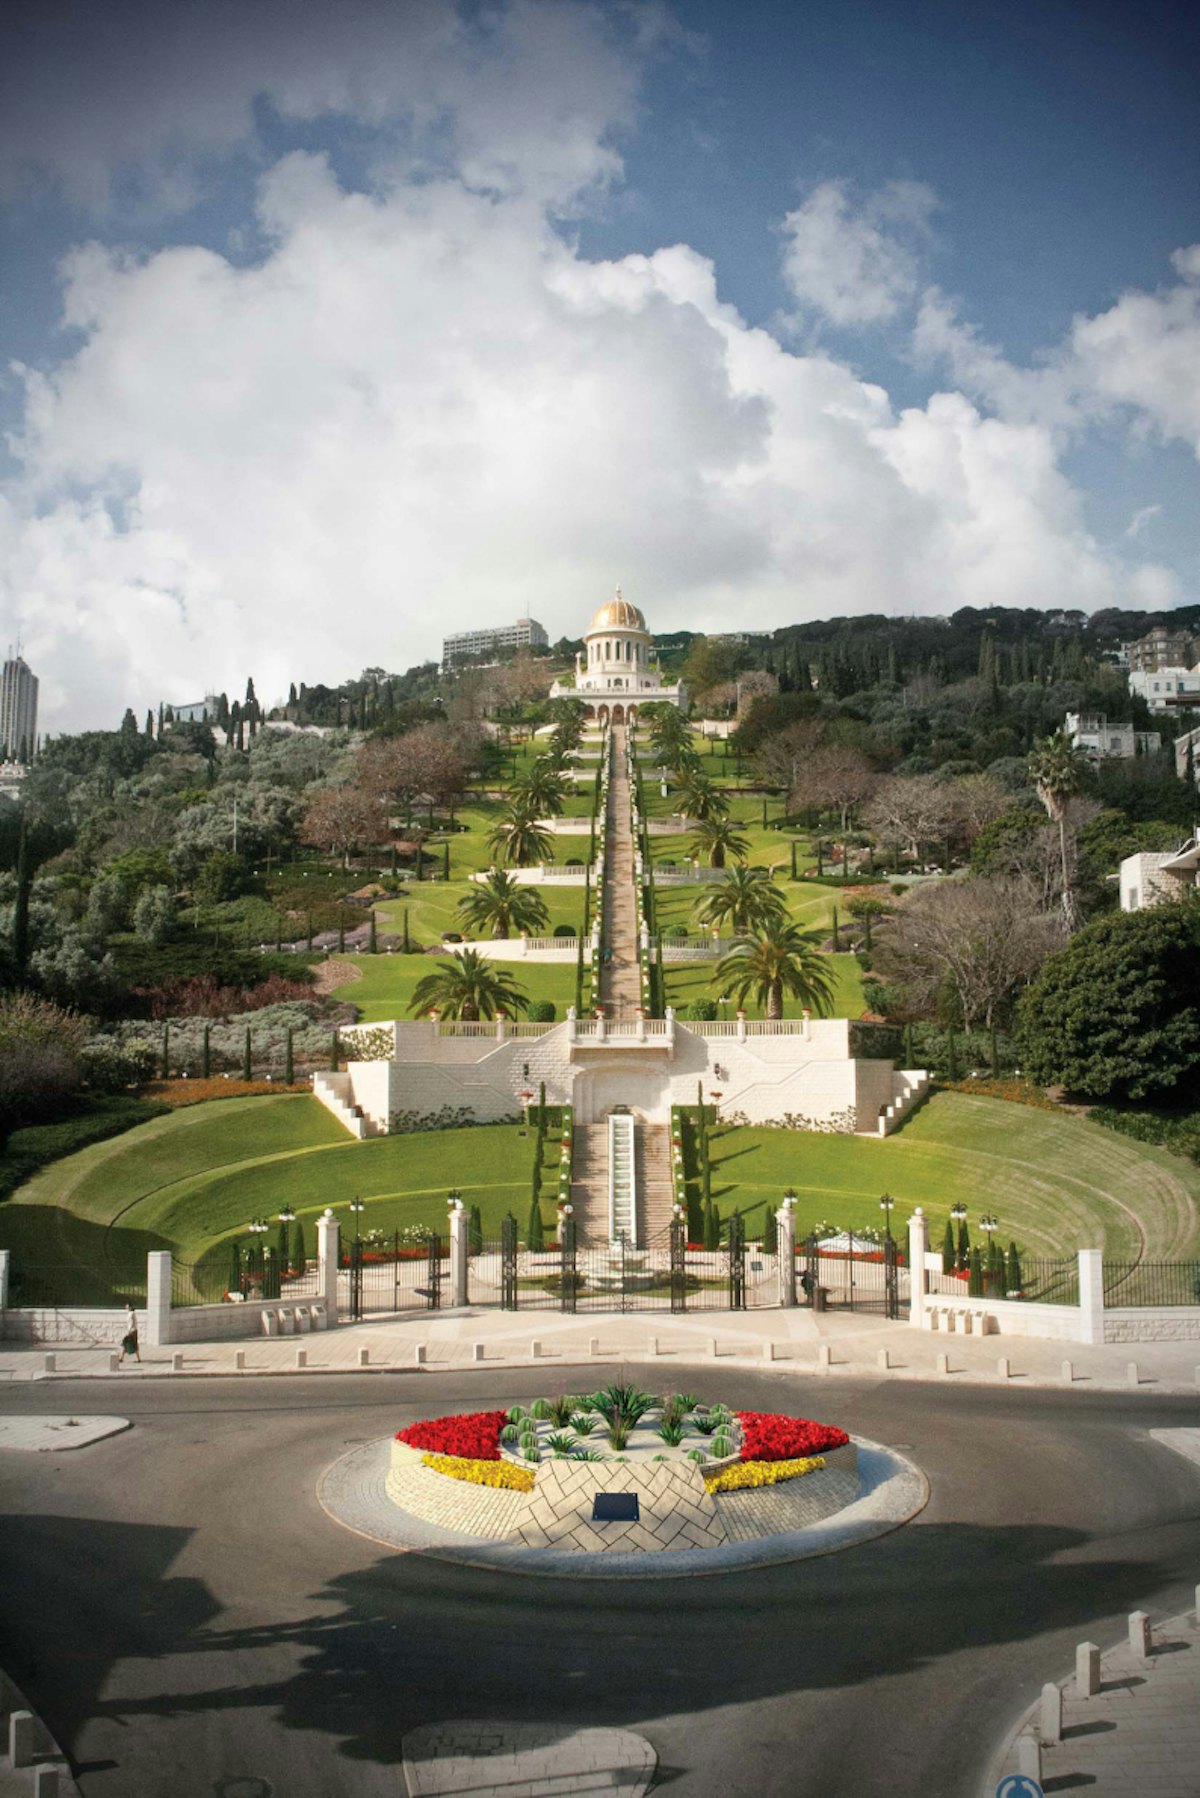 An artist's rendition of future plans for the UNESCO for Tolerance and Peace Square, in front of Haifa's Baha'i gardens. Proposals to enhance the site include upgraded stonework and decorative floral plantings in the centre of its traffic circle, establishing a symbolic bridge between the German Templer colony and the Baha'i gardens.